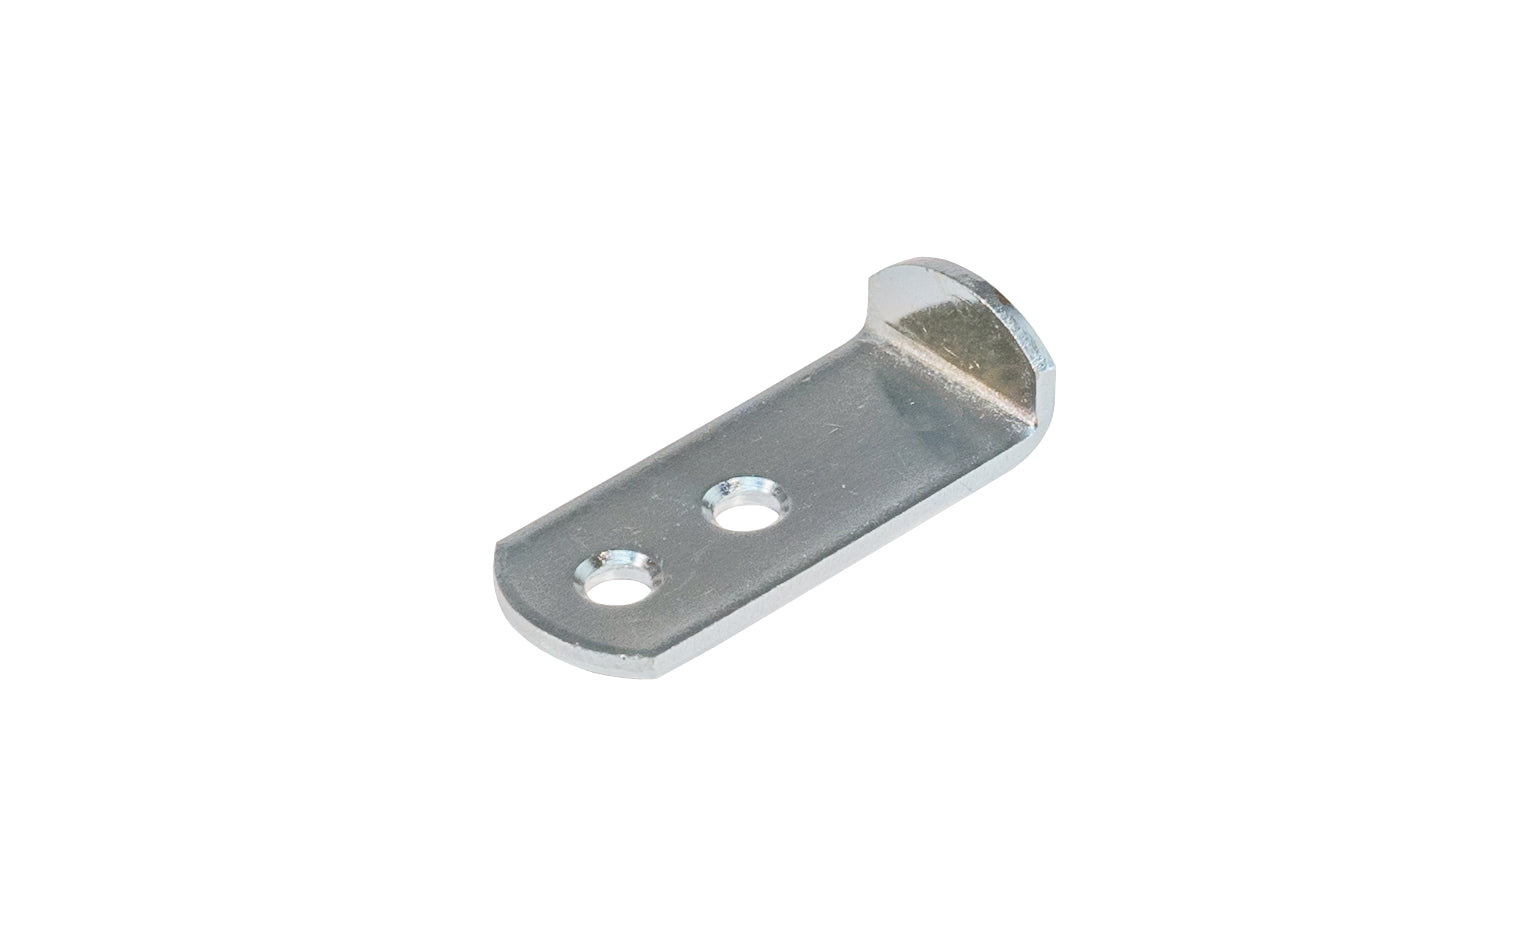 Steel Mirror Clip Support Hanger Bracket Fitting ~ KV Model No. 306-ANO - Commonly used with installation of mirrors, but may also be used in applications - Knape and Vogt 